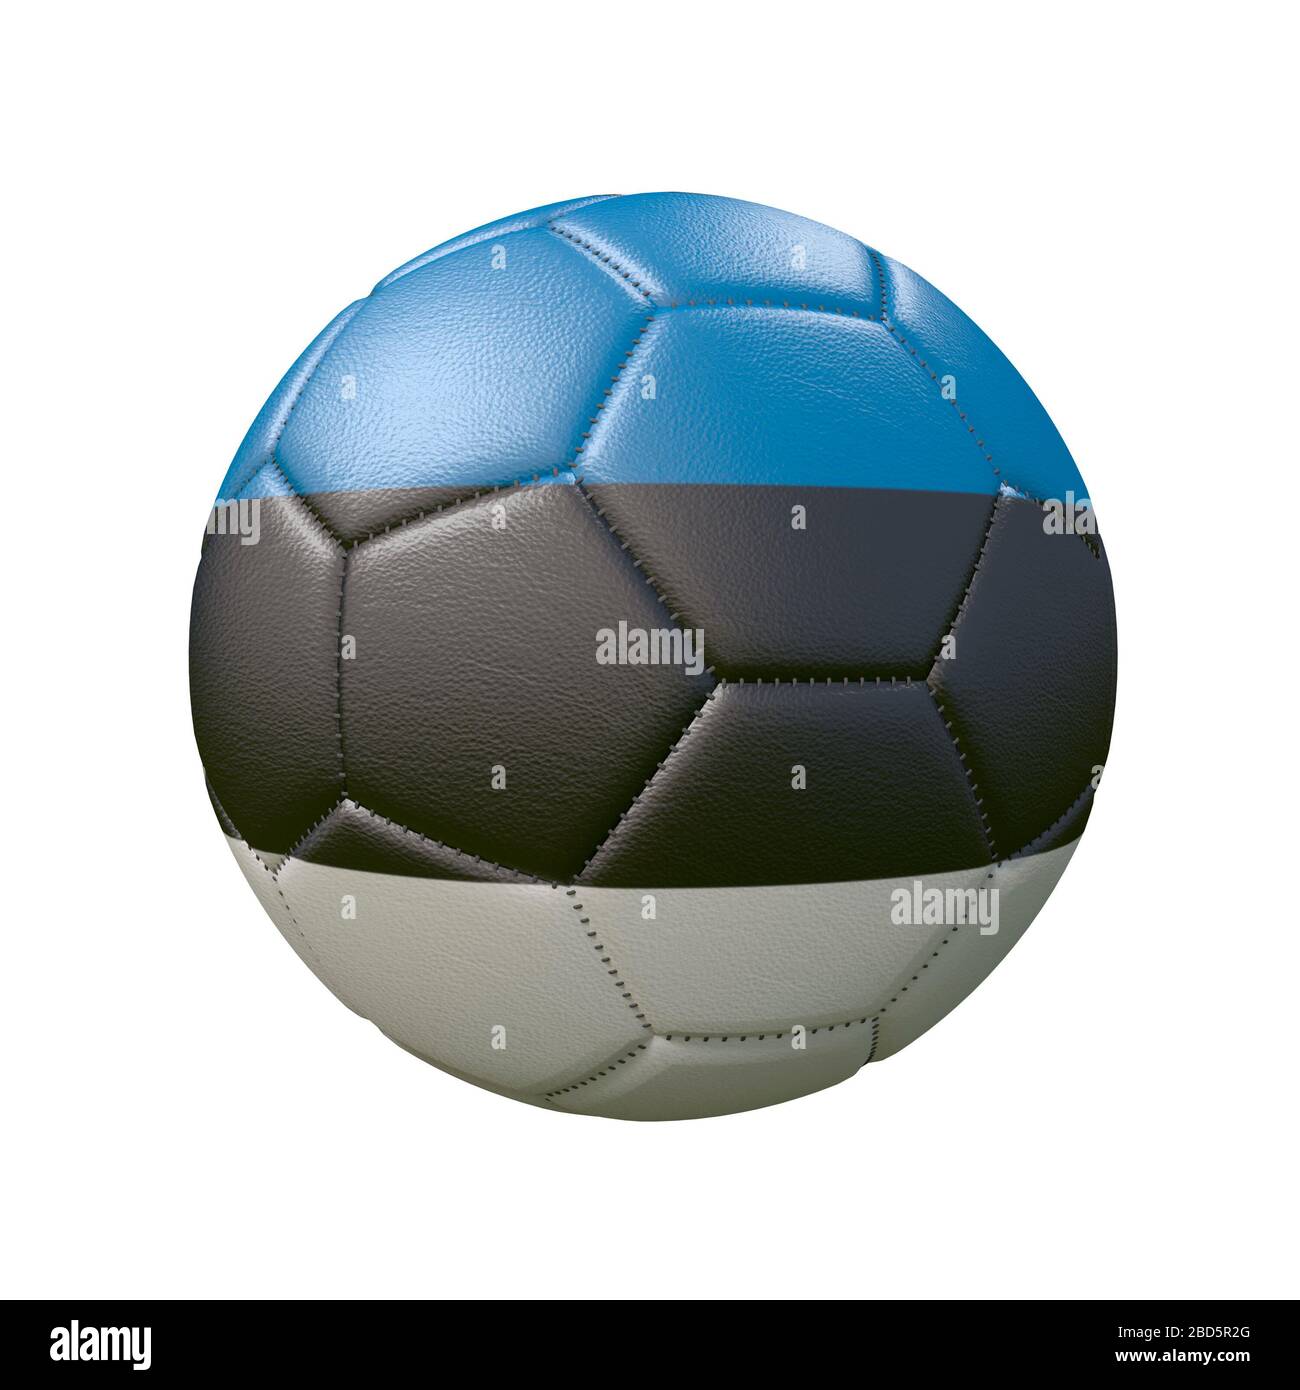 Soccer ball in flag colors isolated on white background. Estonia. 3D image Stock Photo